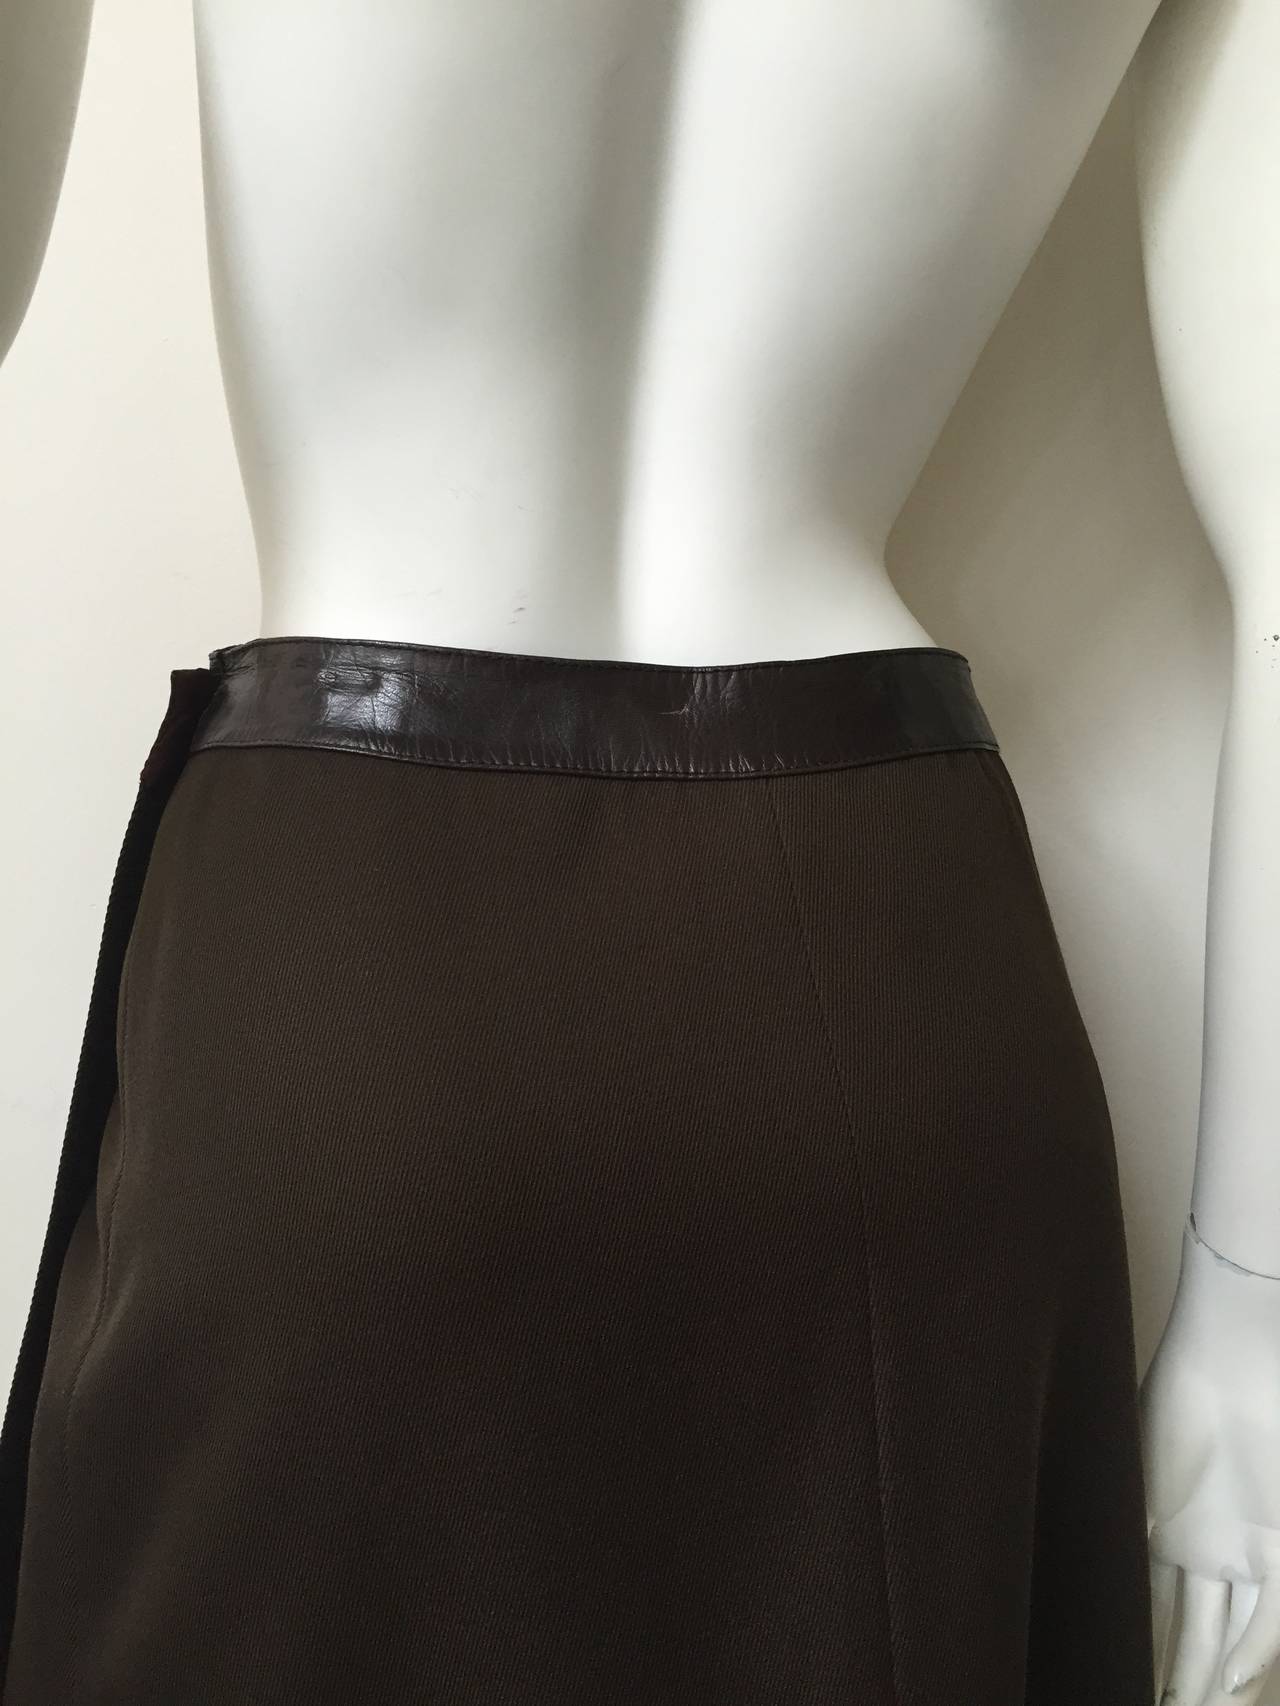 Celine Brown Wool with Leather Trim Wrap Skirt Size 6. In Good Condition For Sale In Atlanta, GA